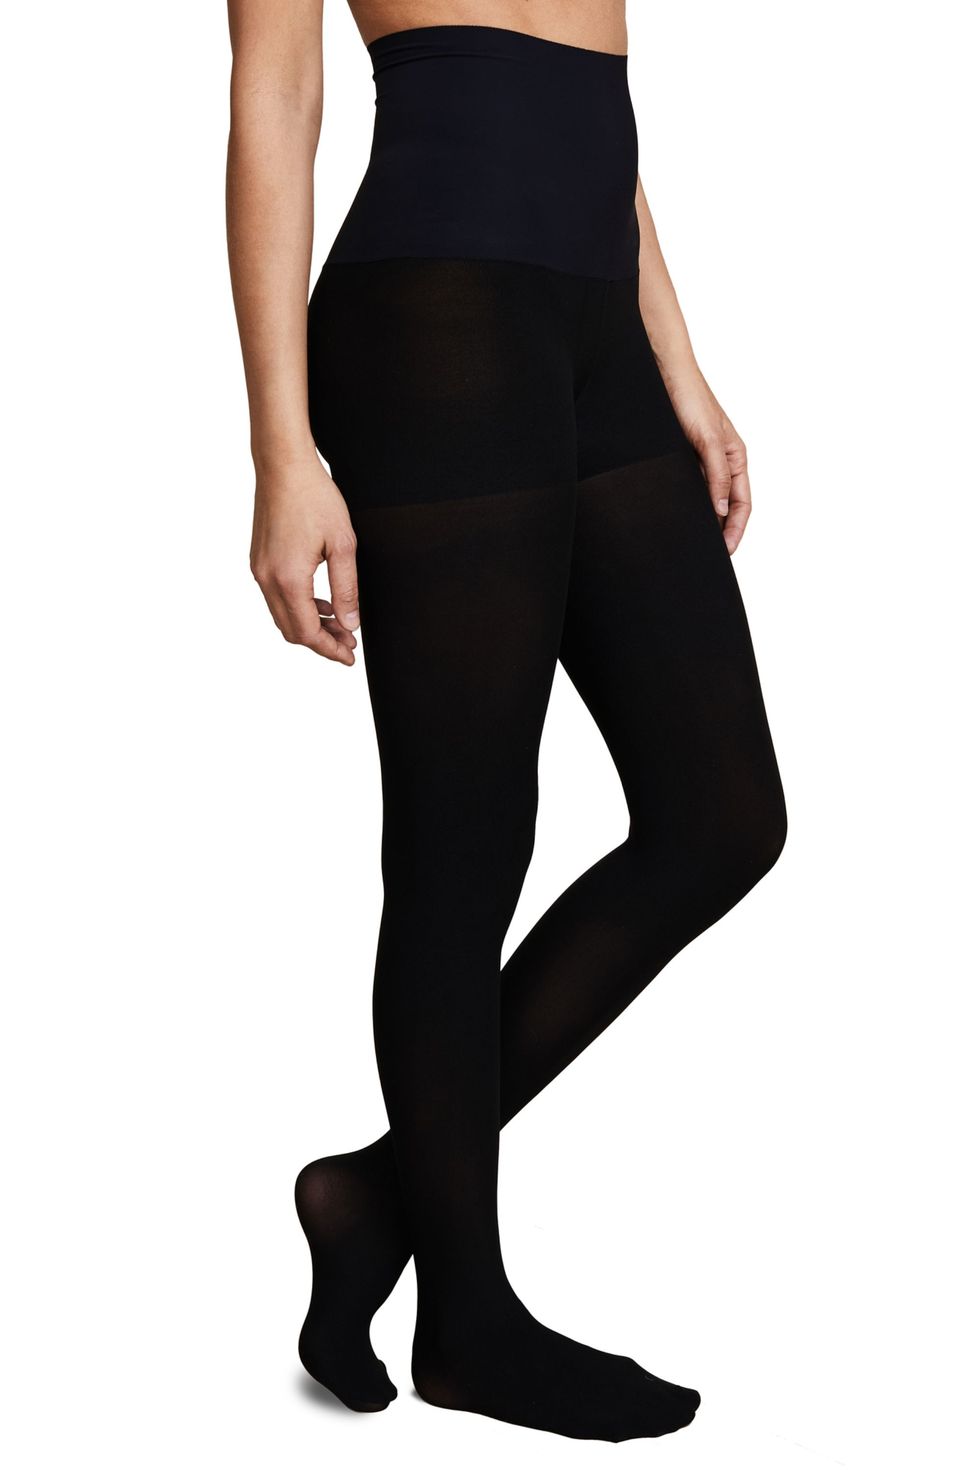 No Nonsense Women's Super Opaque Control-Top Tights : : Clothing,  Shoes & Accessories